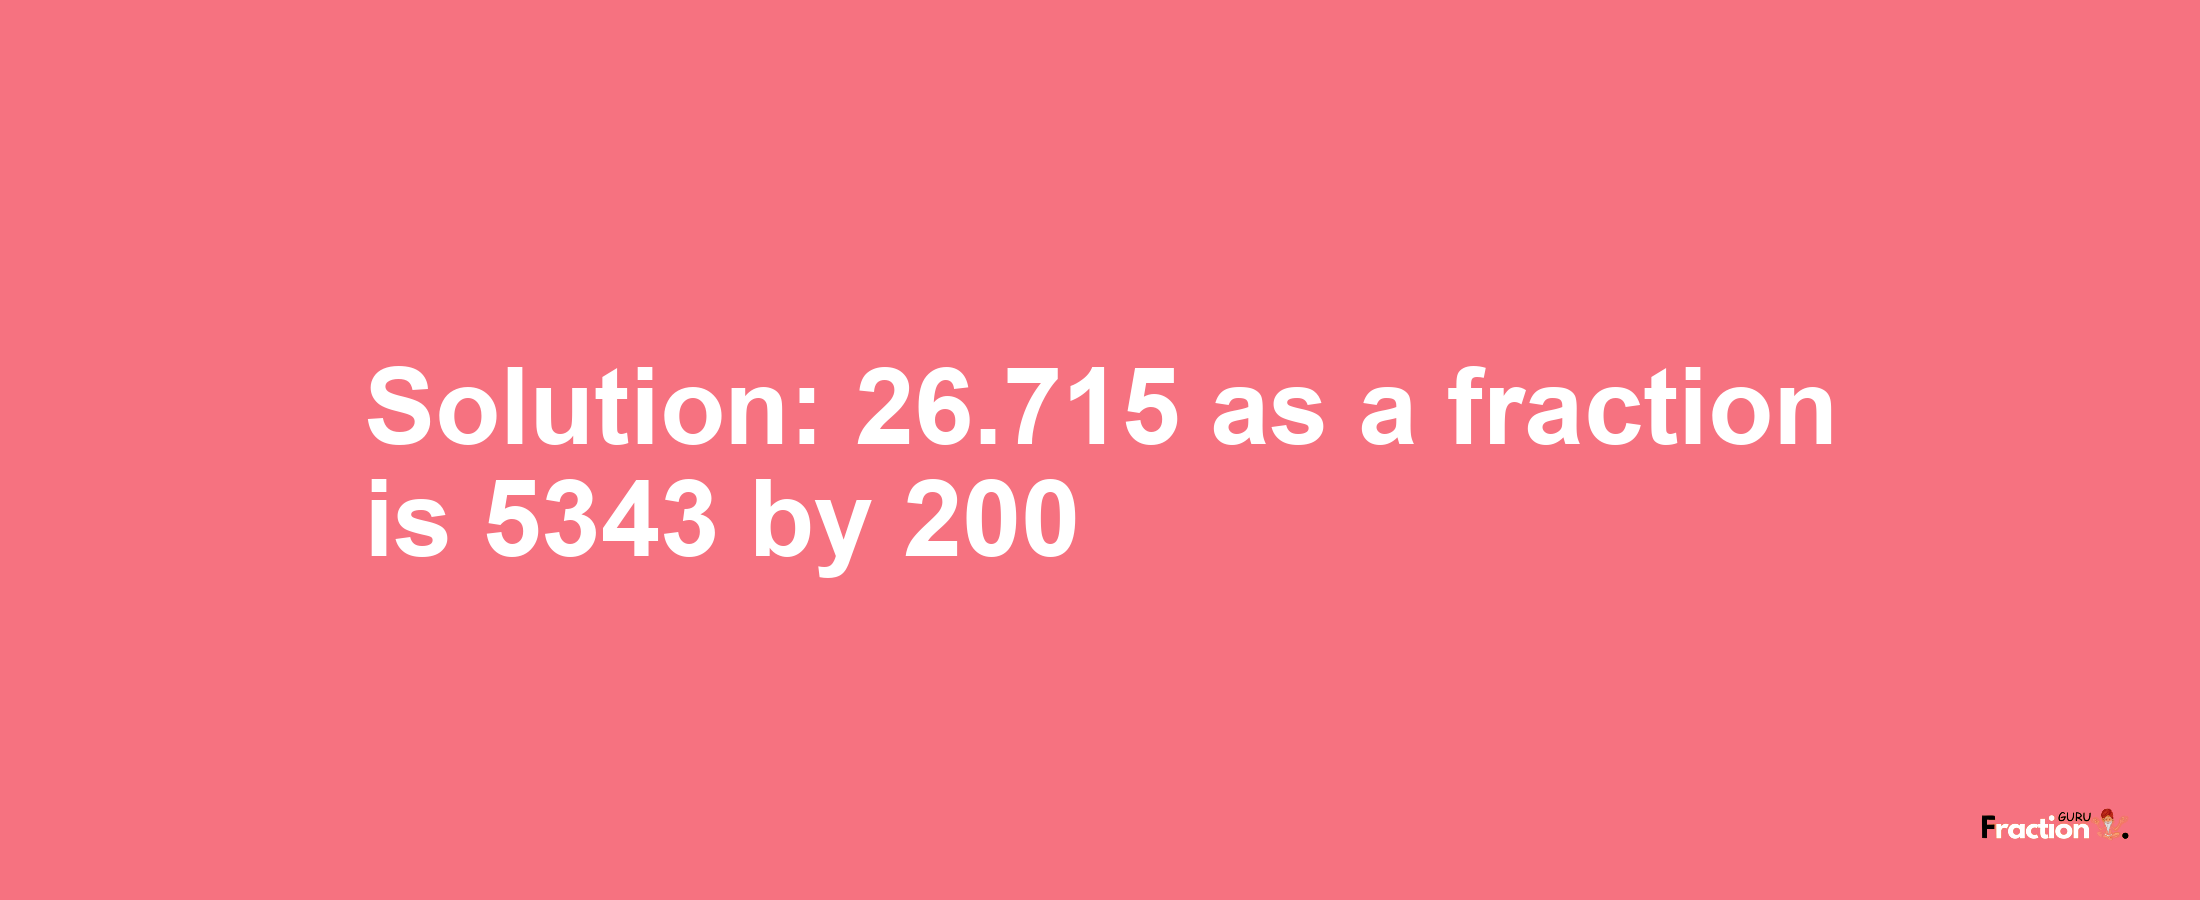 Solution:26.715 as a fraction is 5343/200